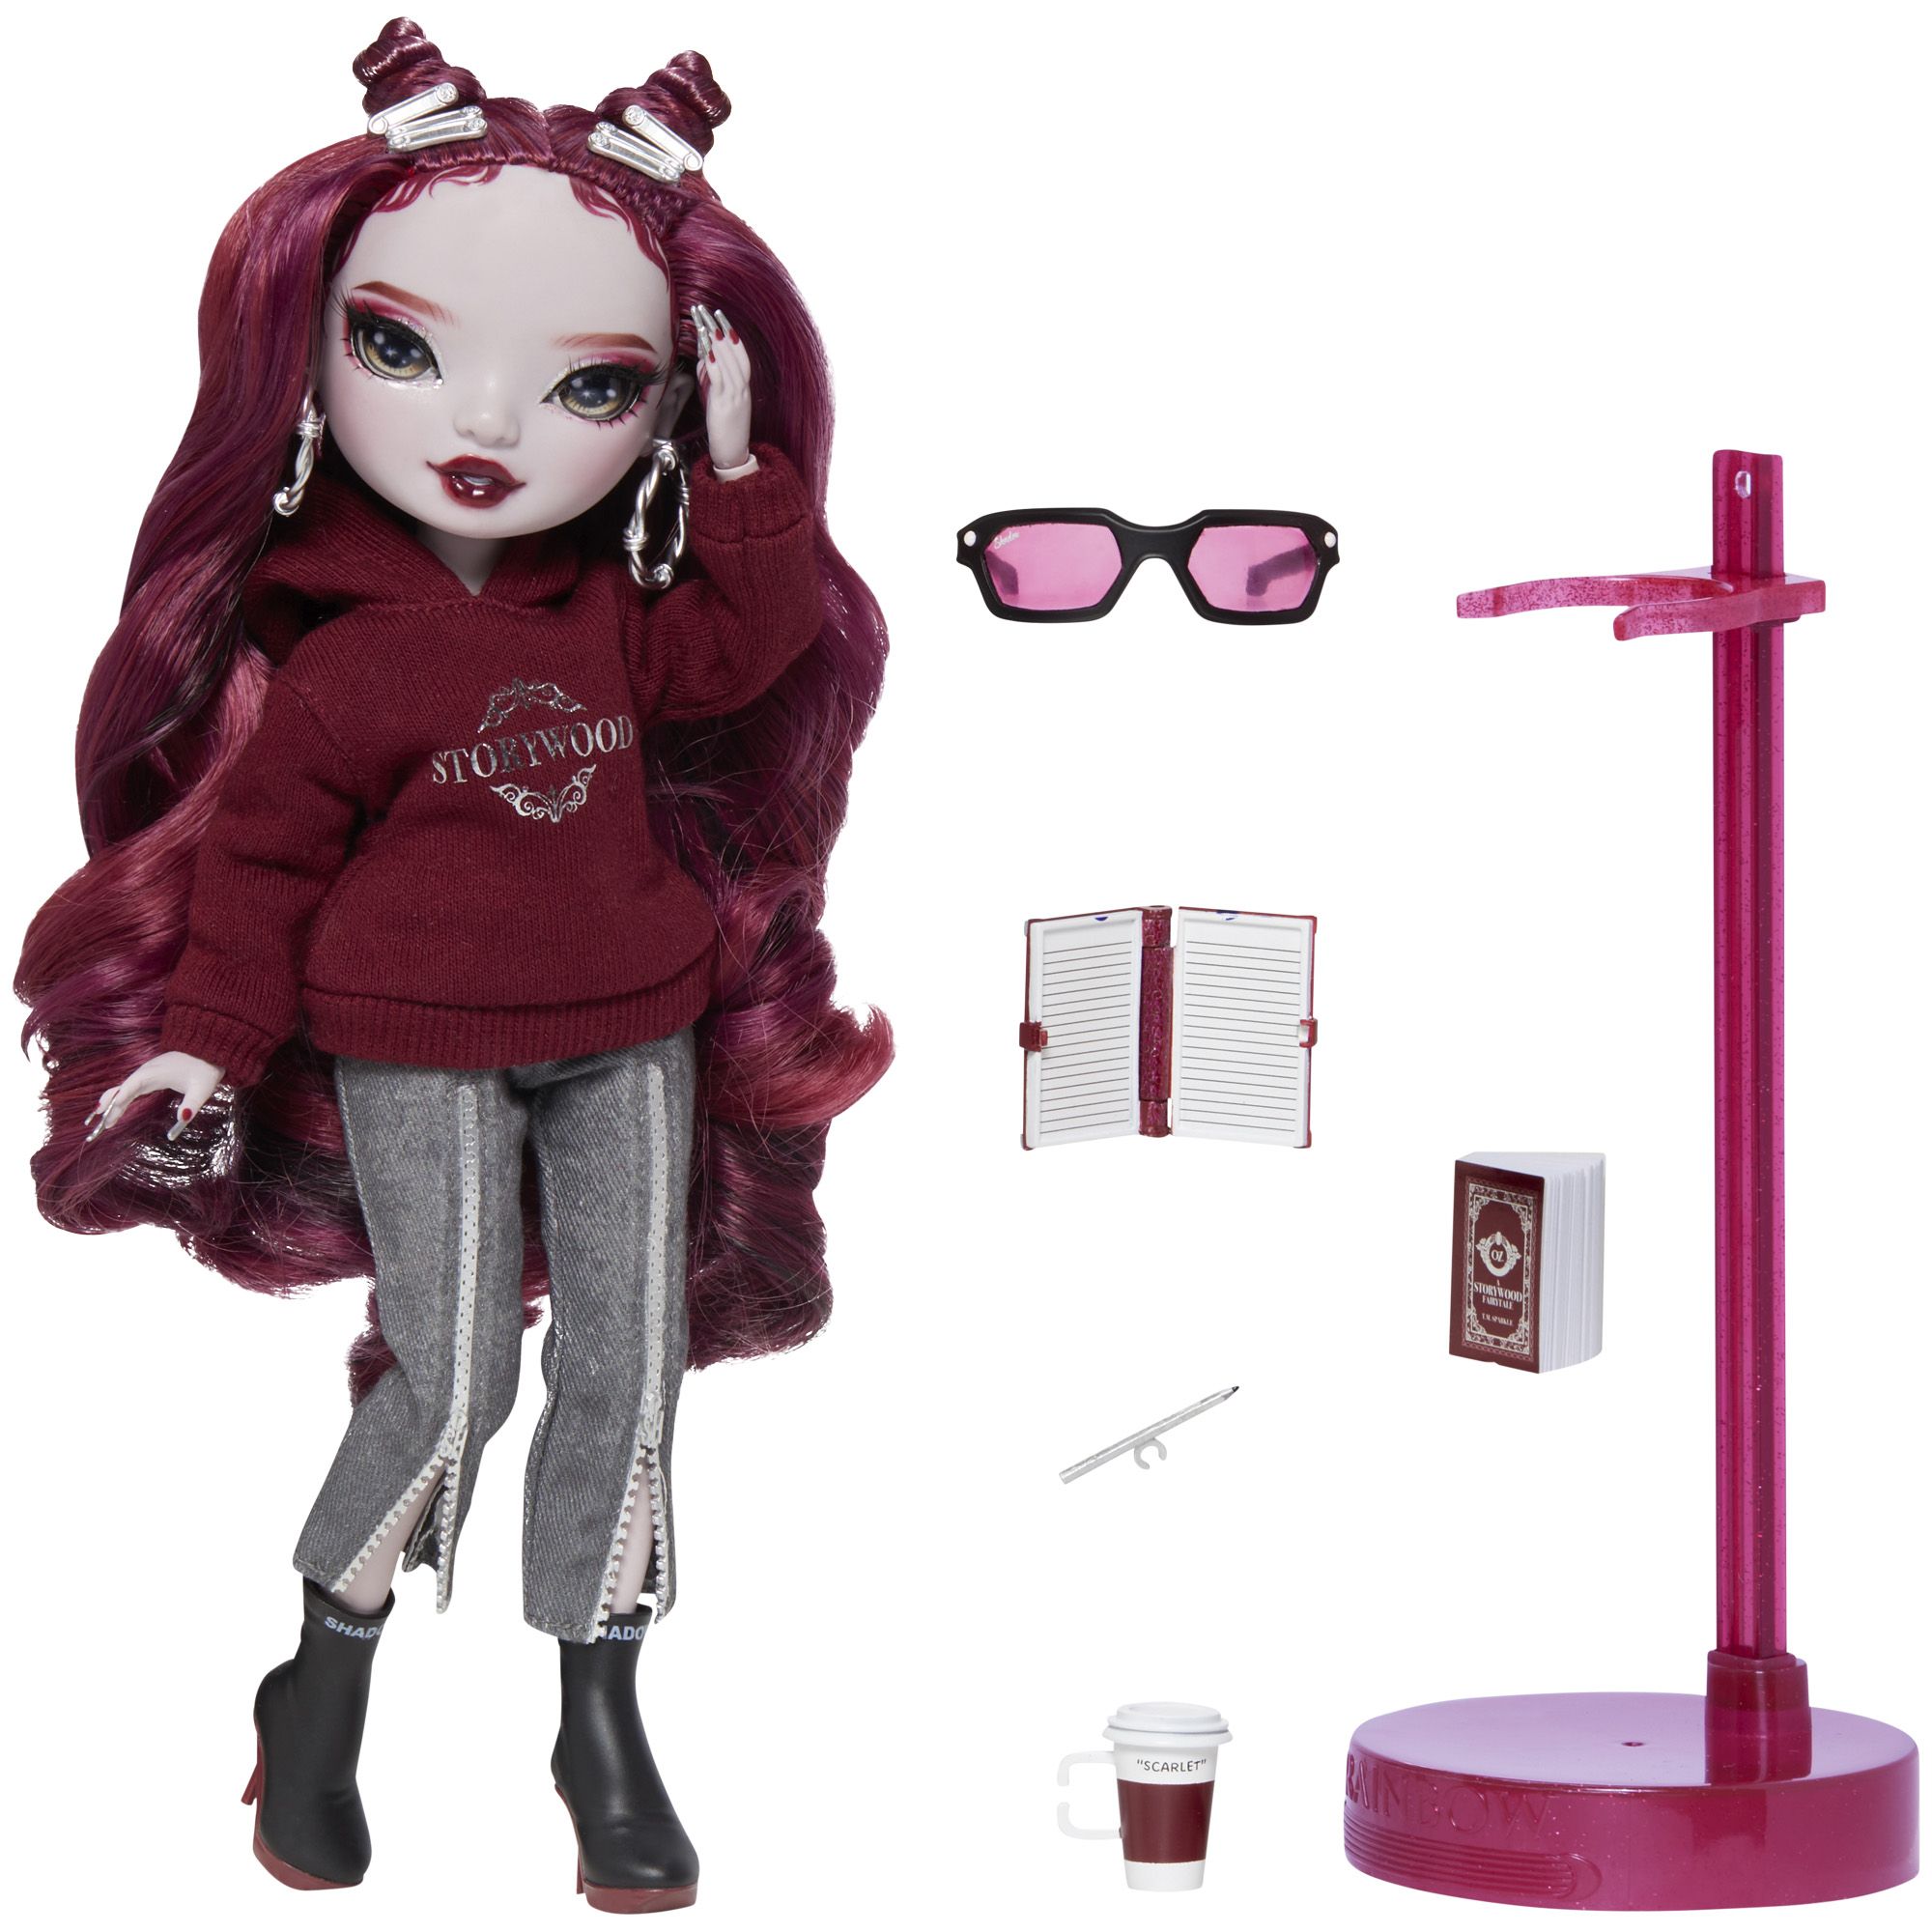 Monster High Barbie Doll Mega Lot Of 7 With Accessories , 2 missing 1 hand